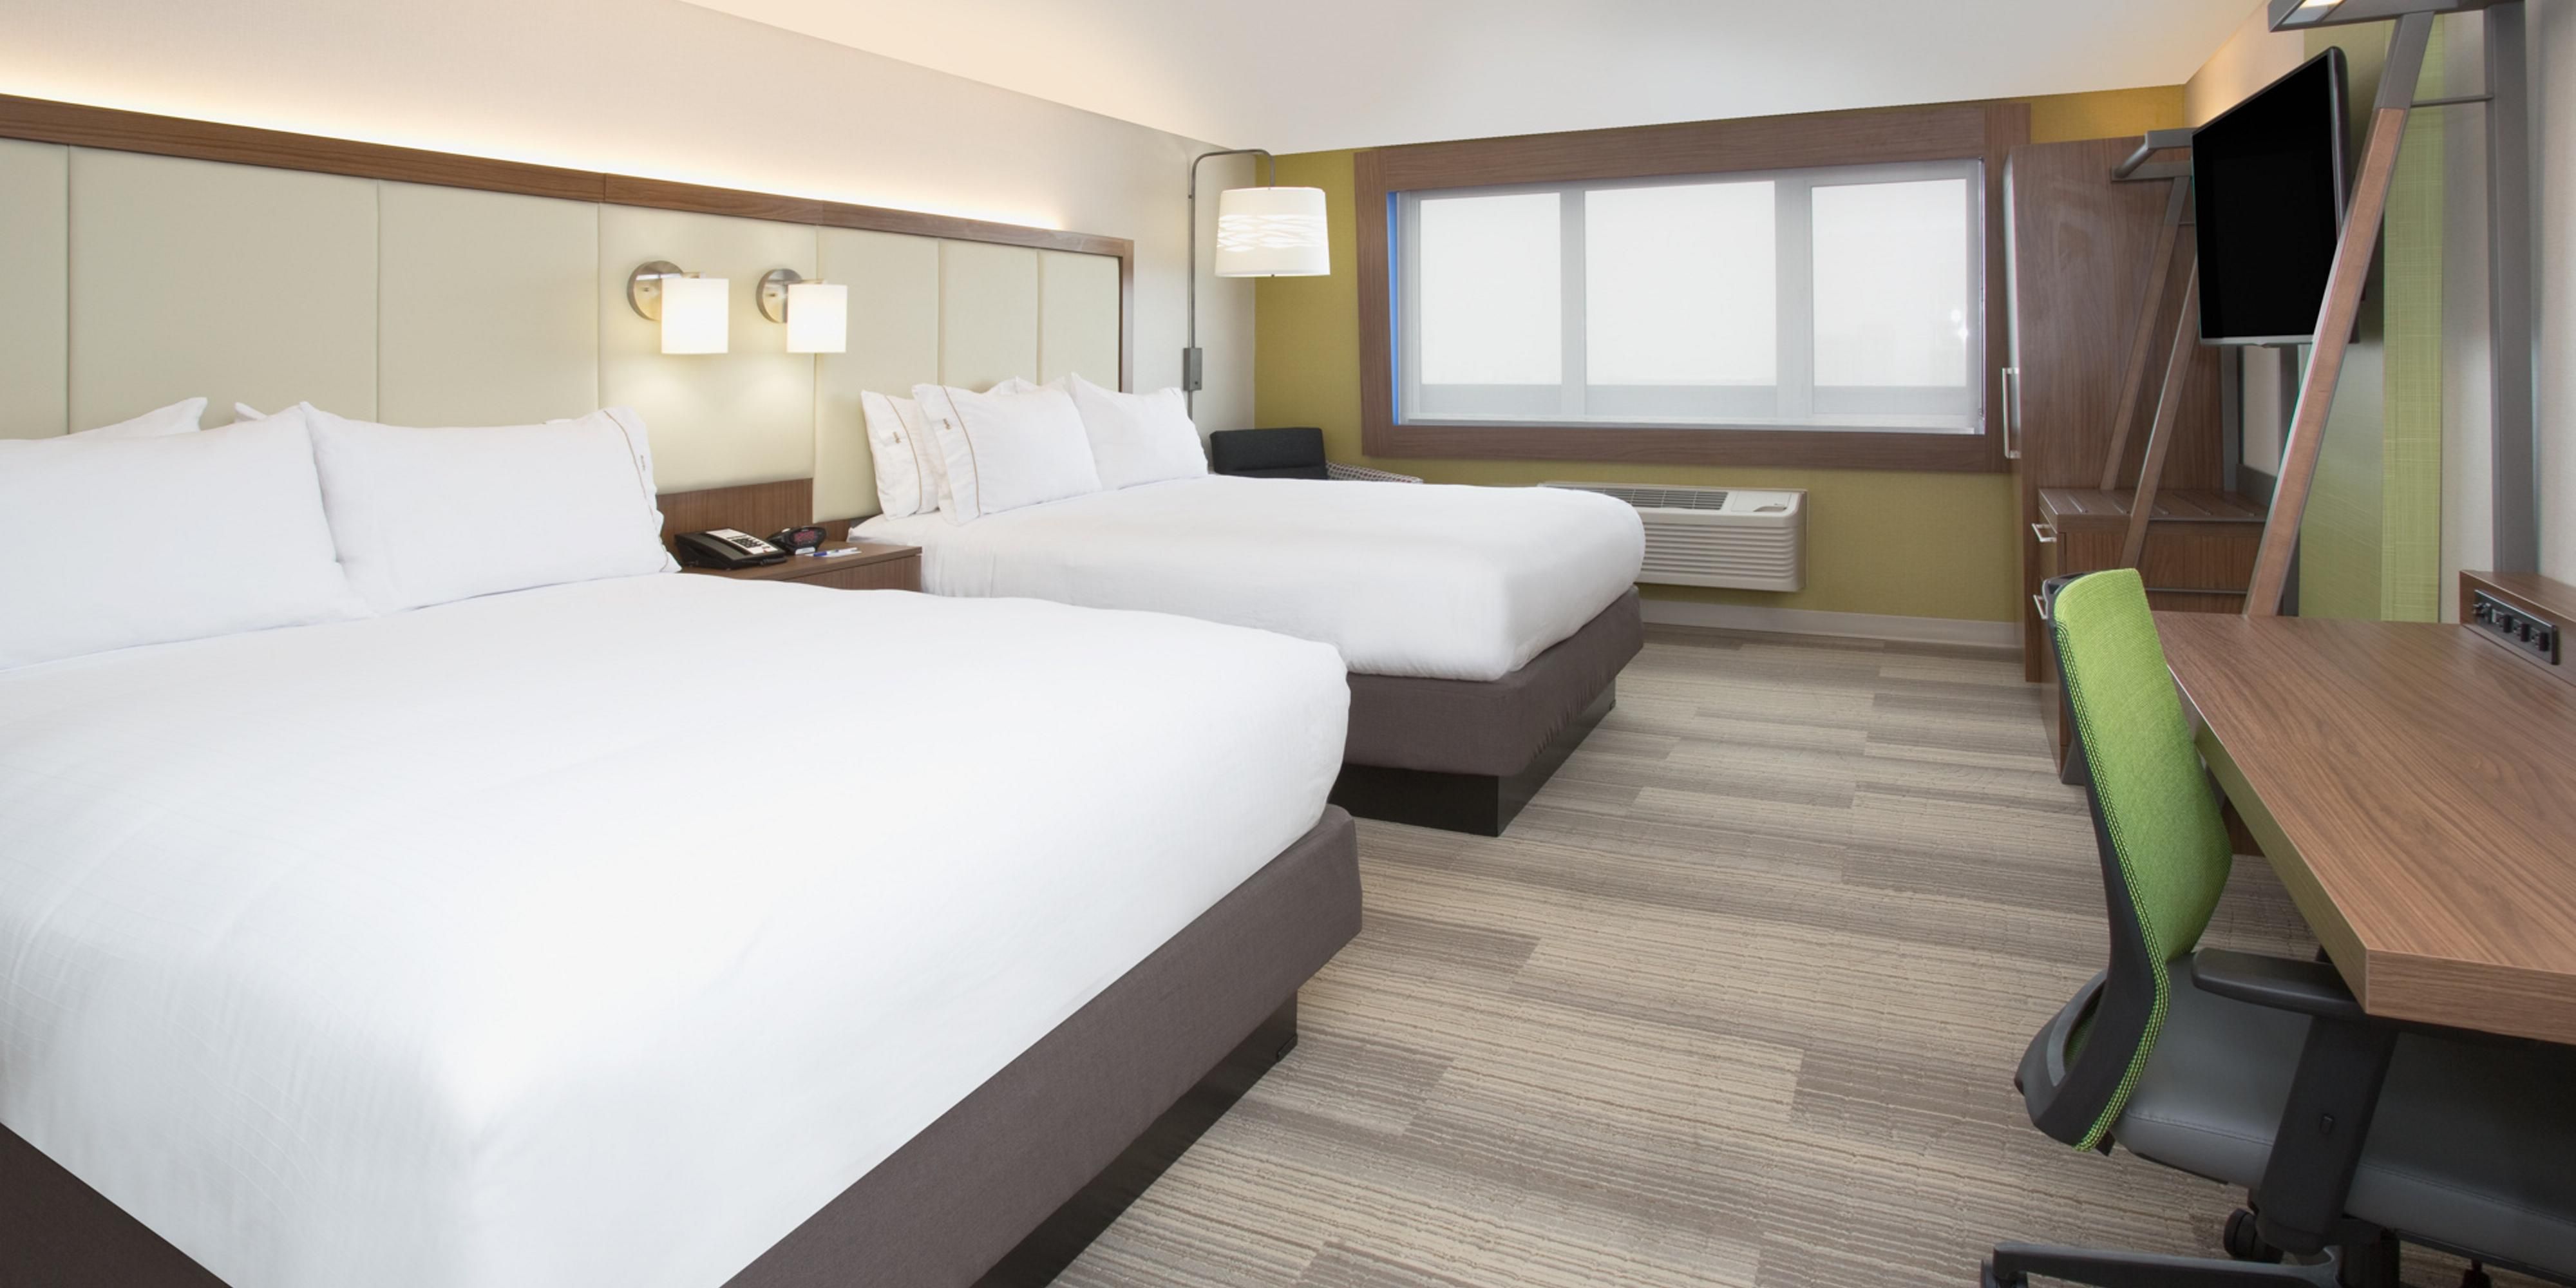 The hotel went through a full renovation in 2019. Guest rooms all include microwaves, refrigerators, personal safes, hairdryers, irons/boards, and Keurig coffee makers. Each guest room includes a new mattress set and both firm and soft pillows so you can sleep comfortably as you would in your own home.